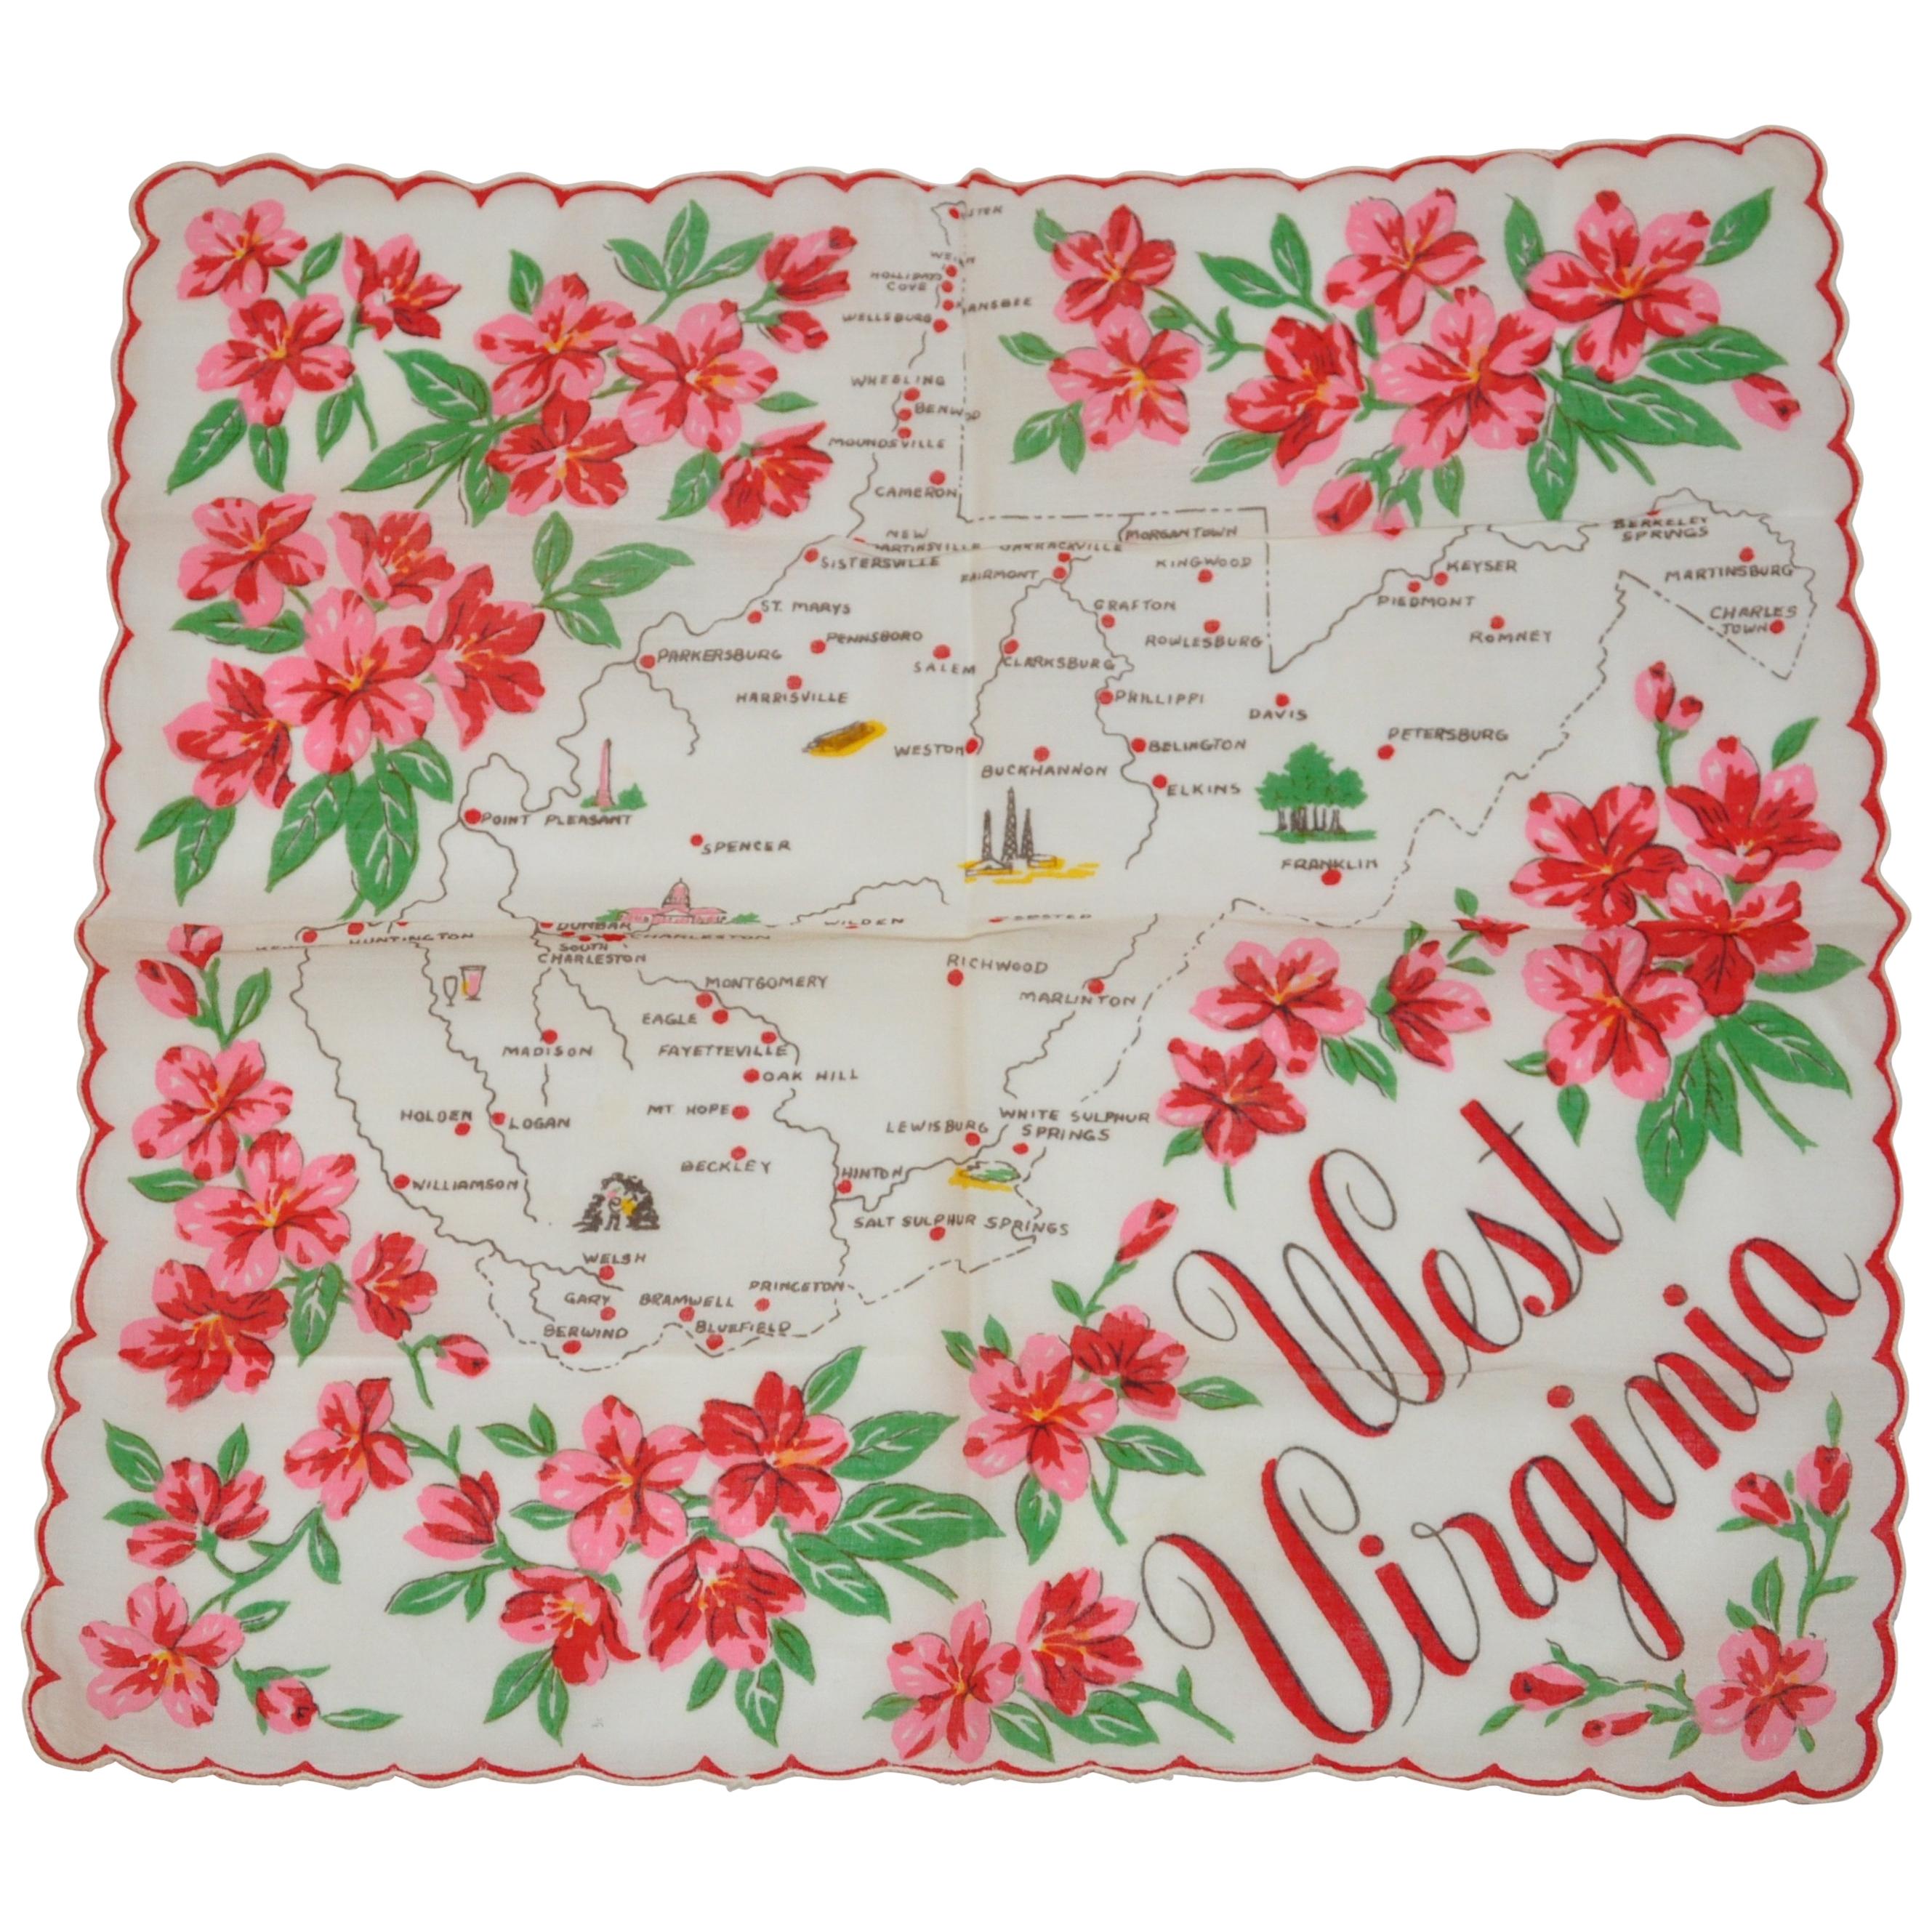 "West Virginia" Cream with Red Florals Area Map Scalloped Cotton Handkerchief